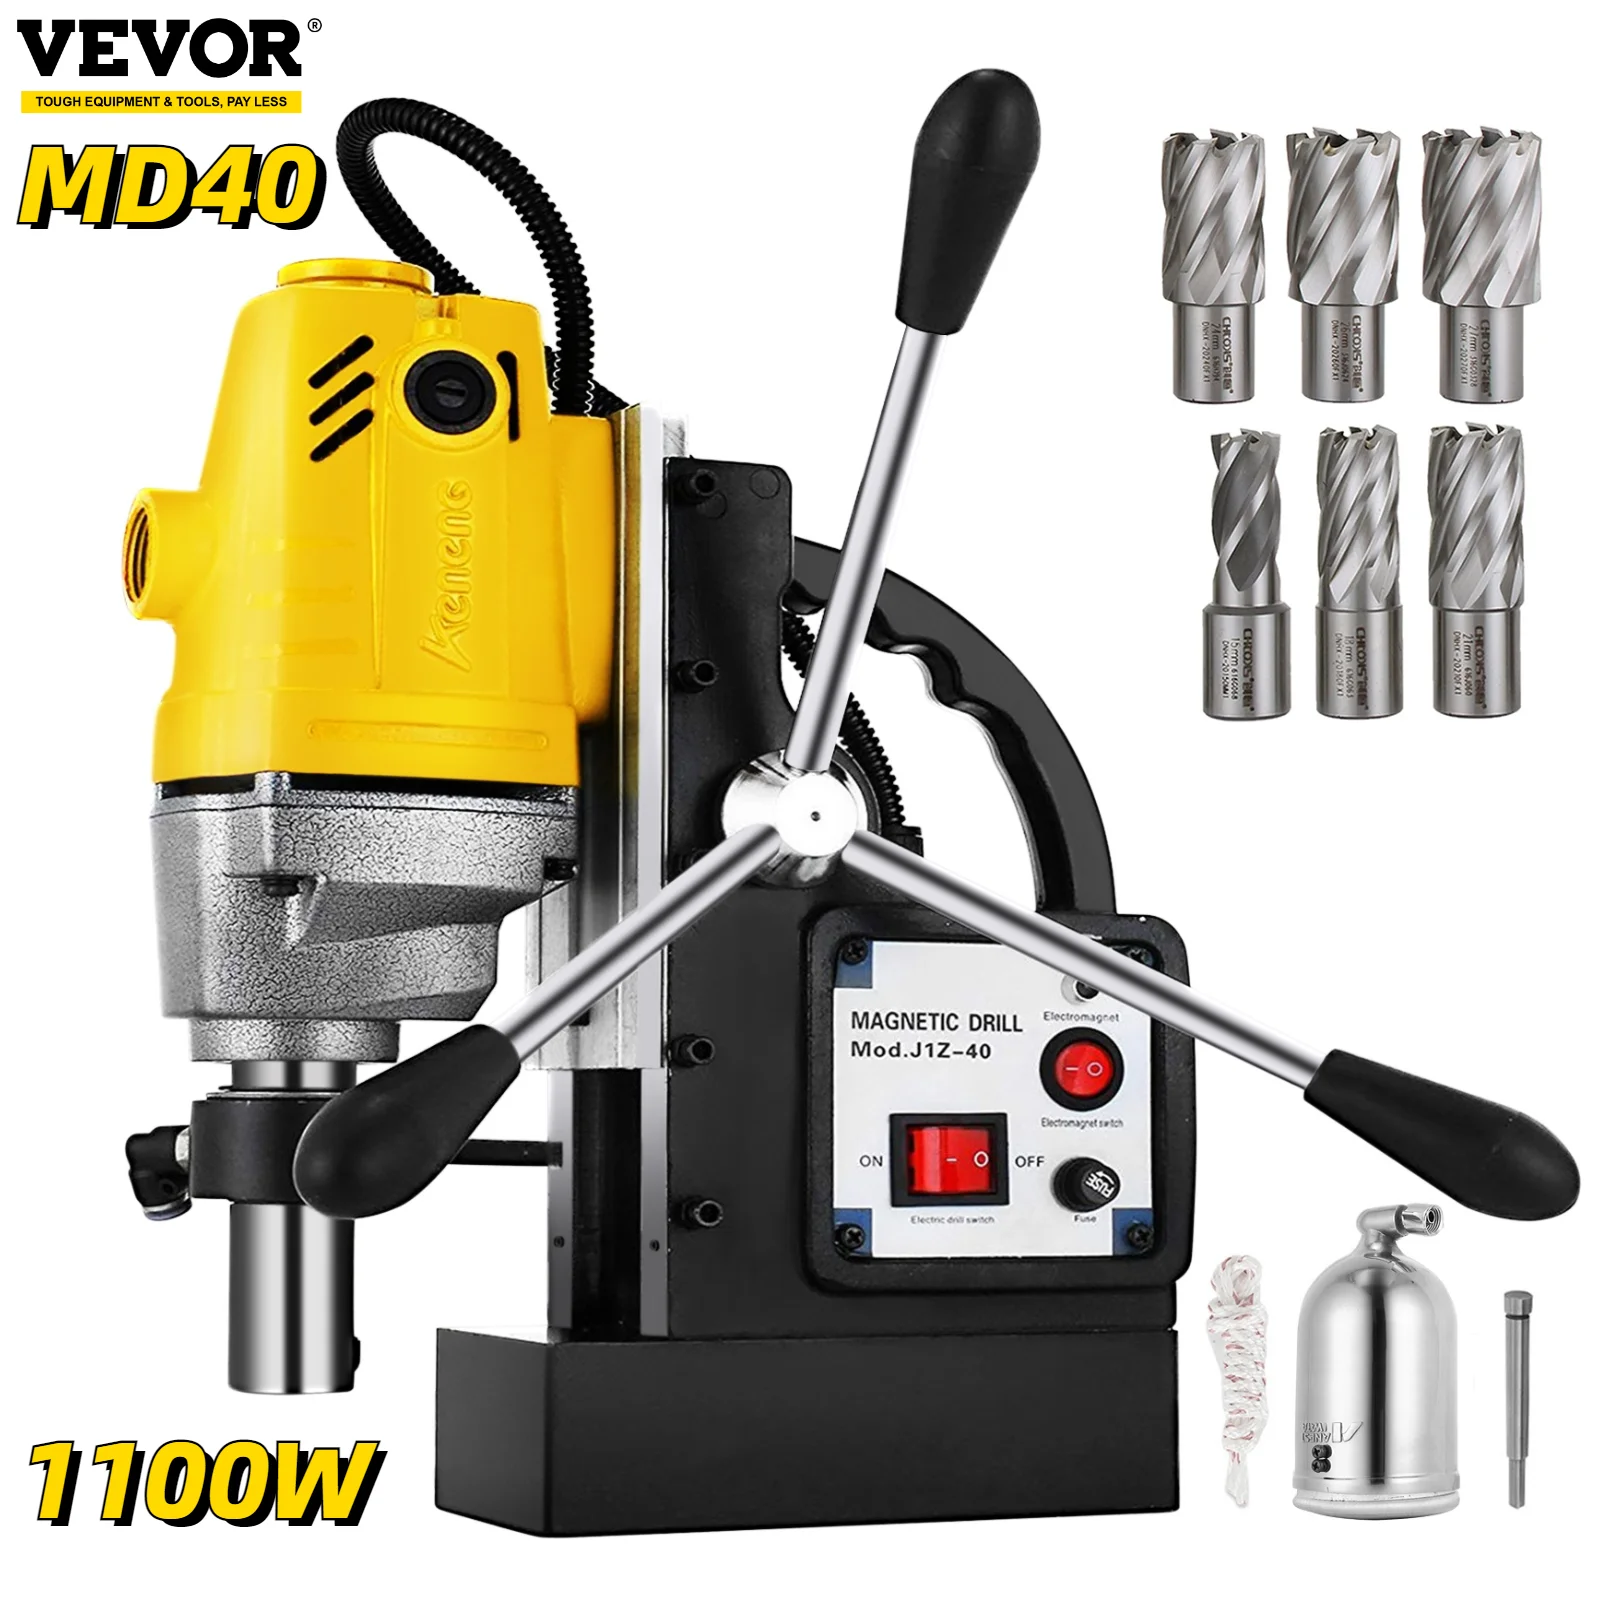 1100W MD40 Magnetic Drill Press 40mm Boring 12000N Mag Force Industrial Tapping 